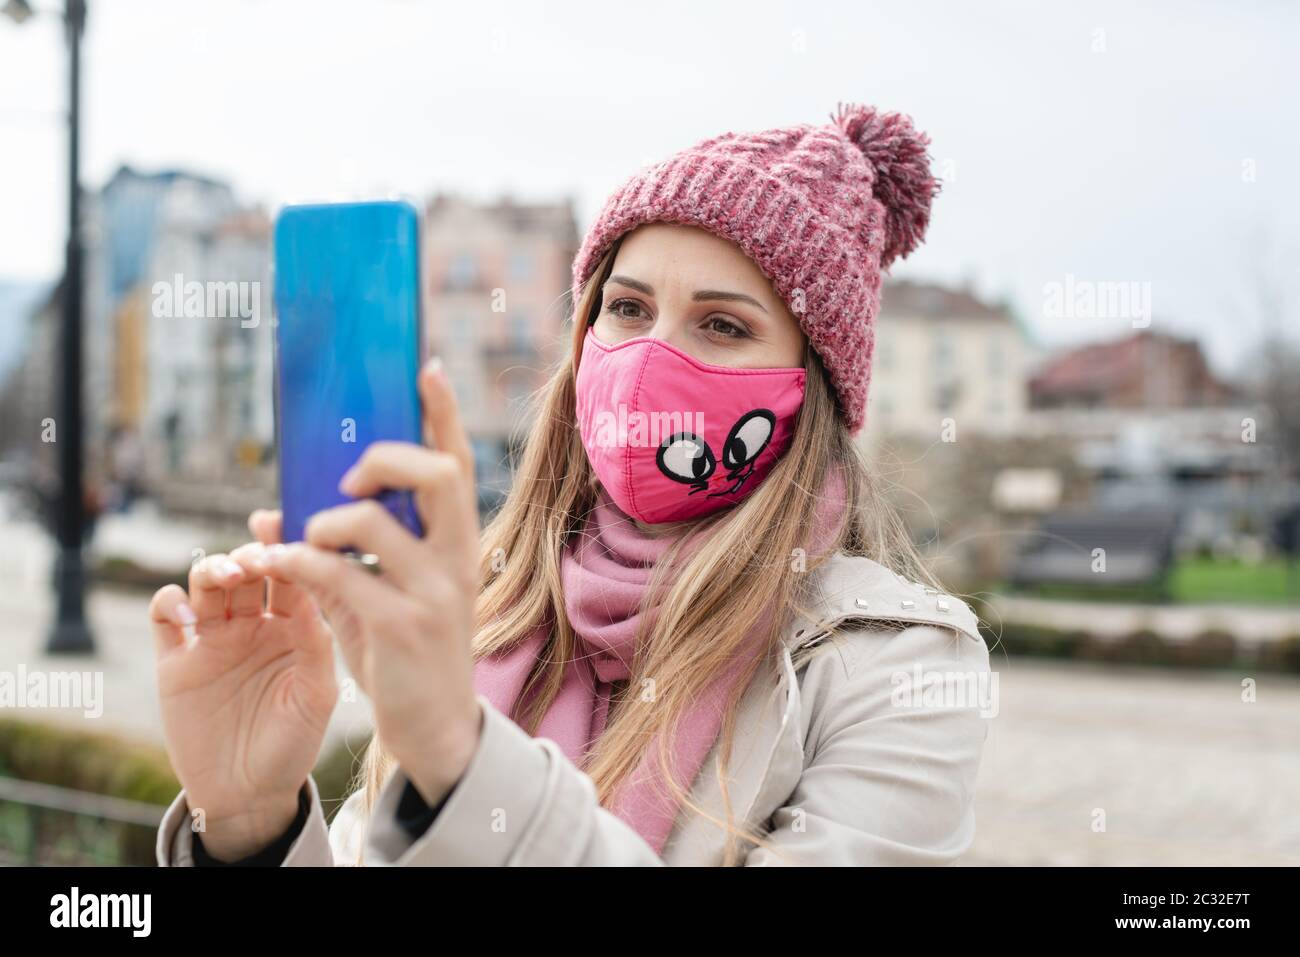 Woman wearing corona mask making selfie with phone in city Stock Photo